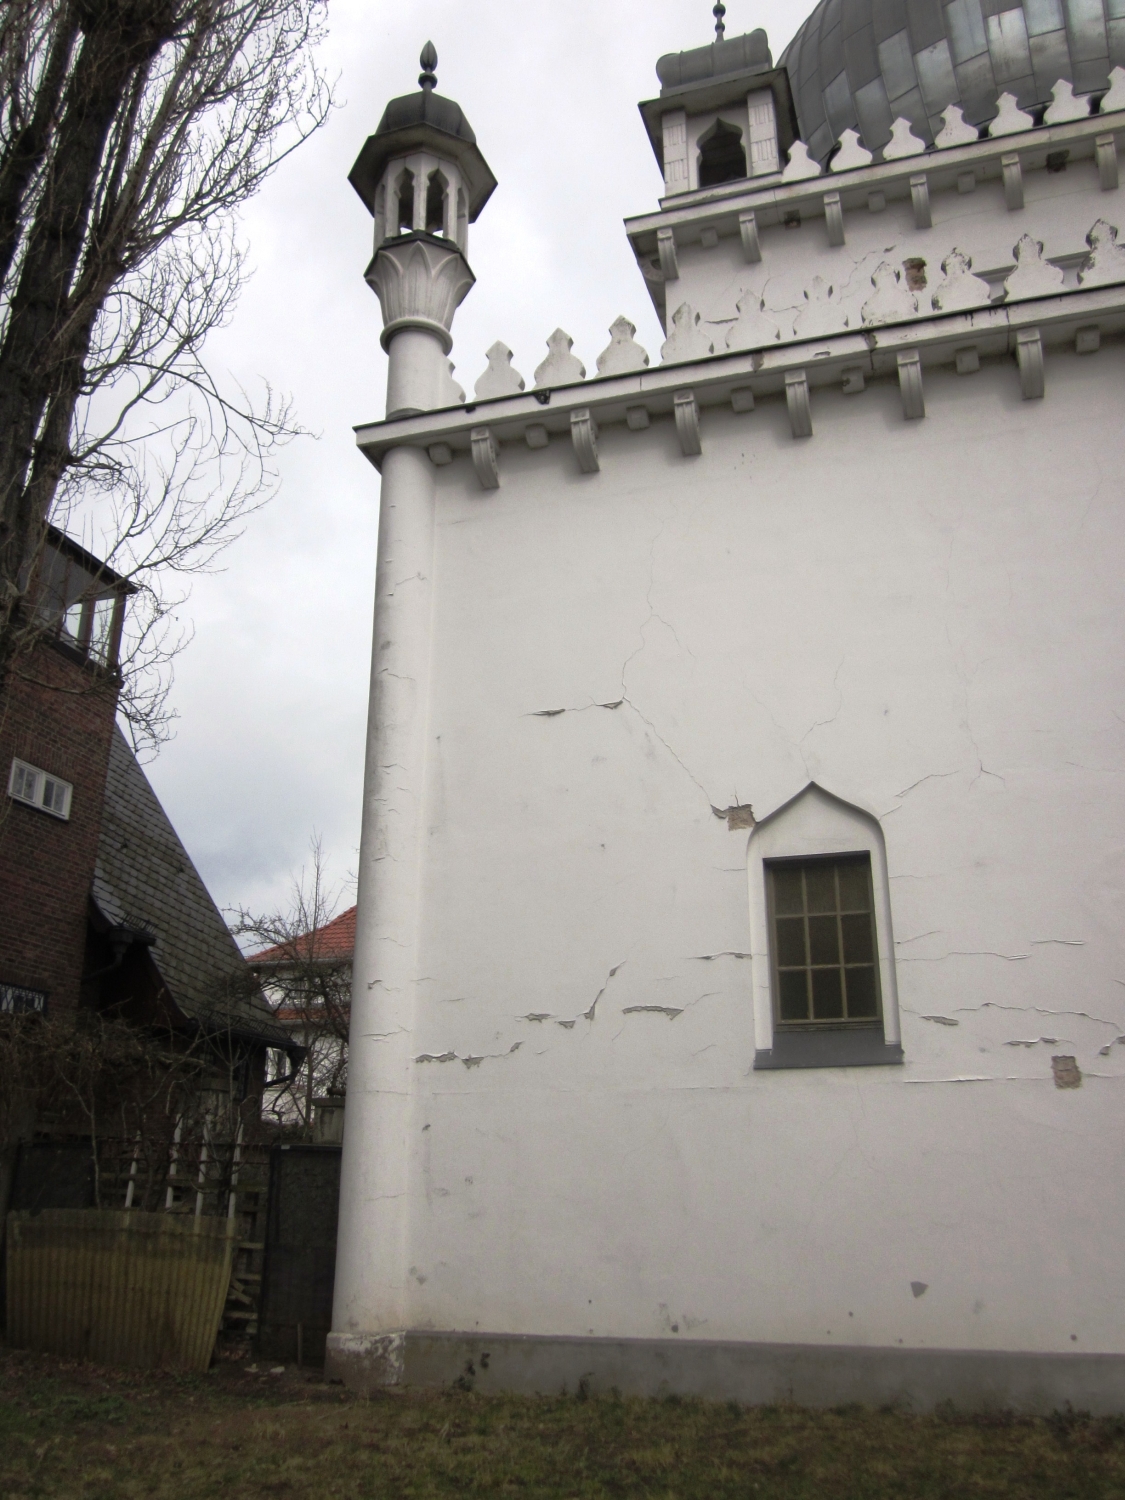 Exterior detail of the southwest corner of the mosque